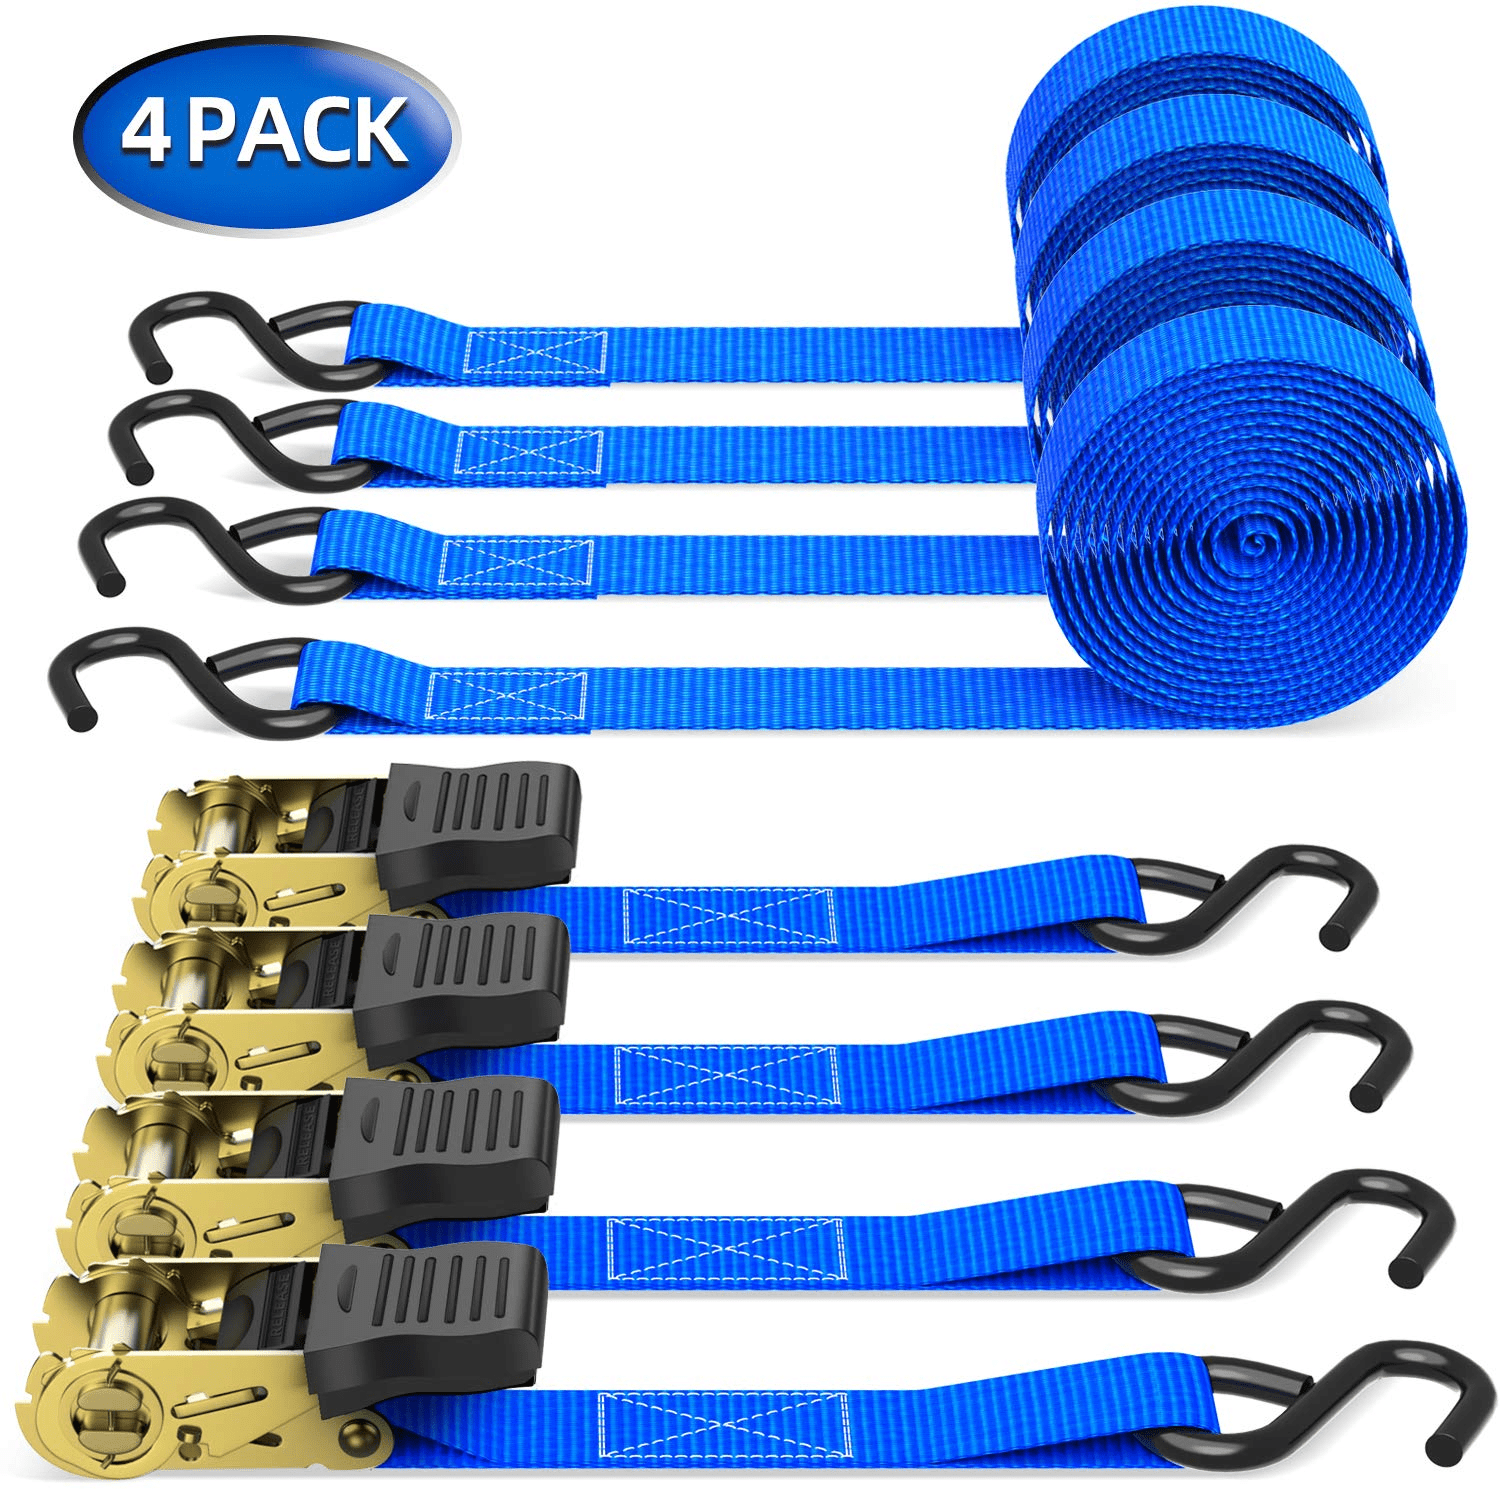 Ratchet Tie Down Straps Pack 15 Ft 500 Lbs Load Cap with 1500 Lb  Breaking Limit, Cargo Car Truck Roof Rack Rachet Strap Set for Lawn  Equipment, Moving Appliances, Motorcycle Blue